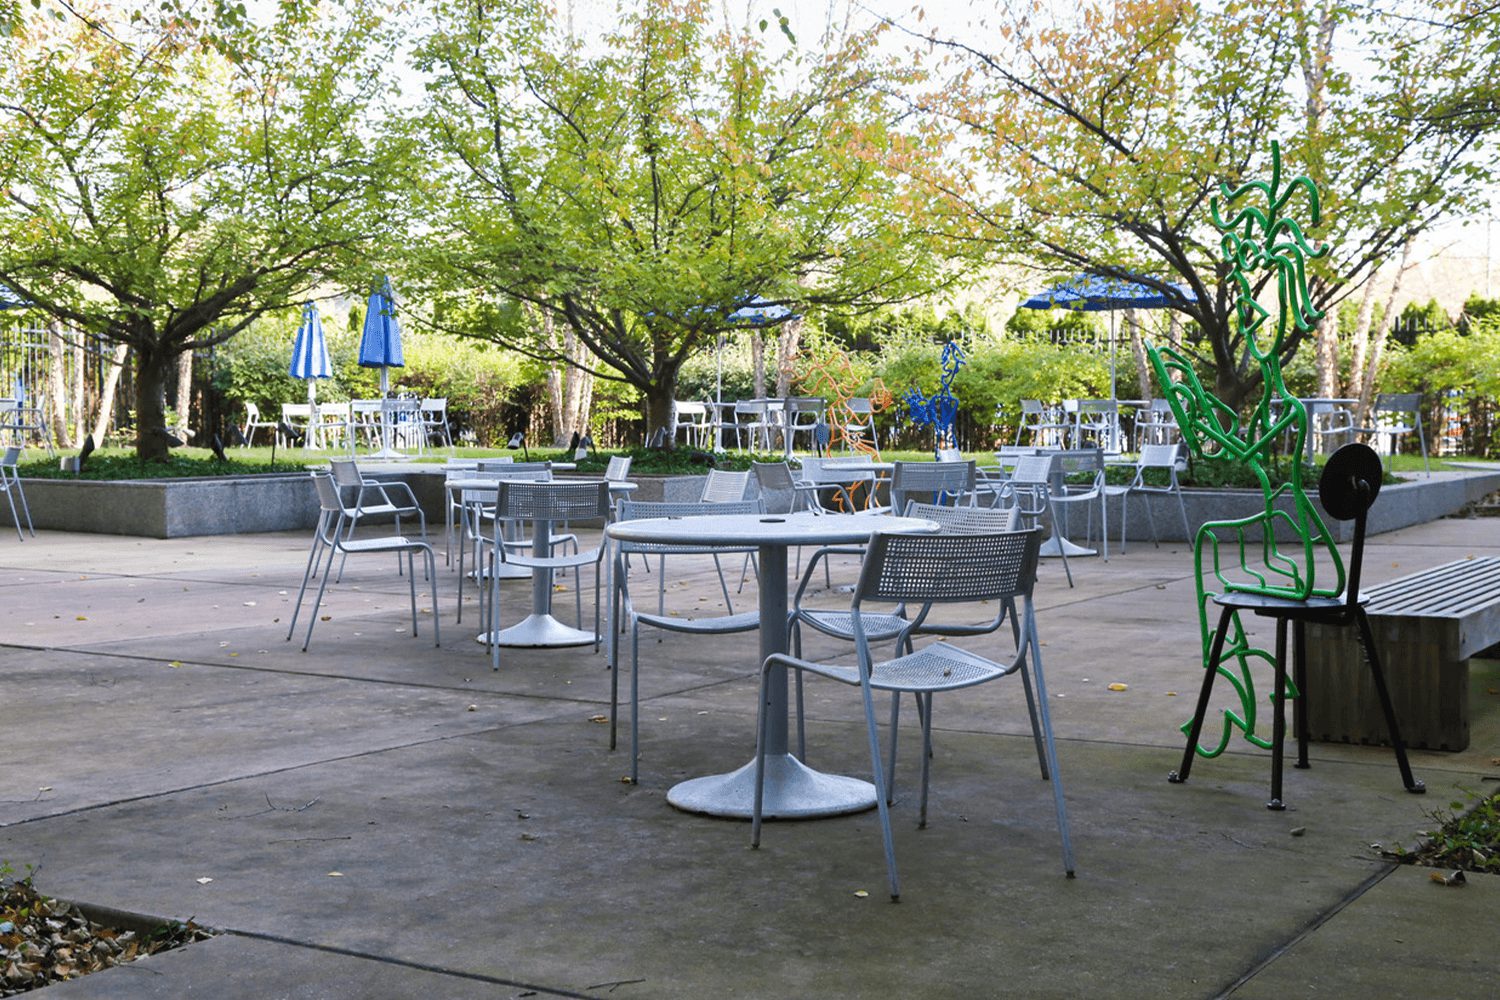 Outdoor patio with tables and chairs shaded by trees